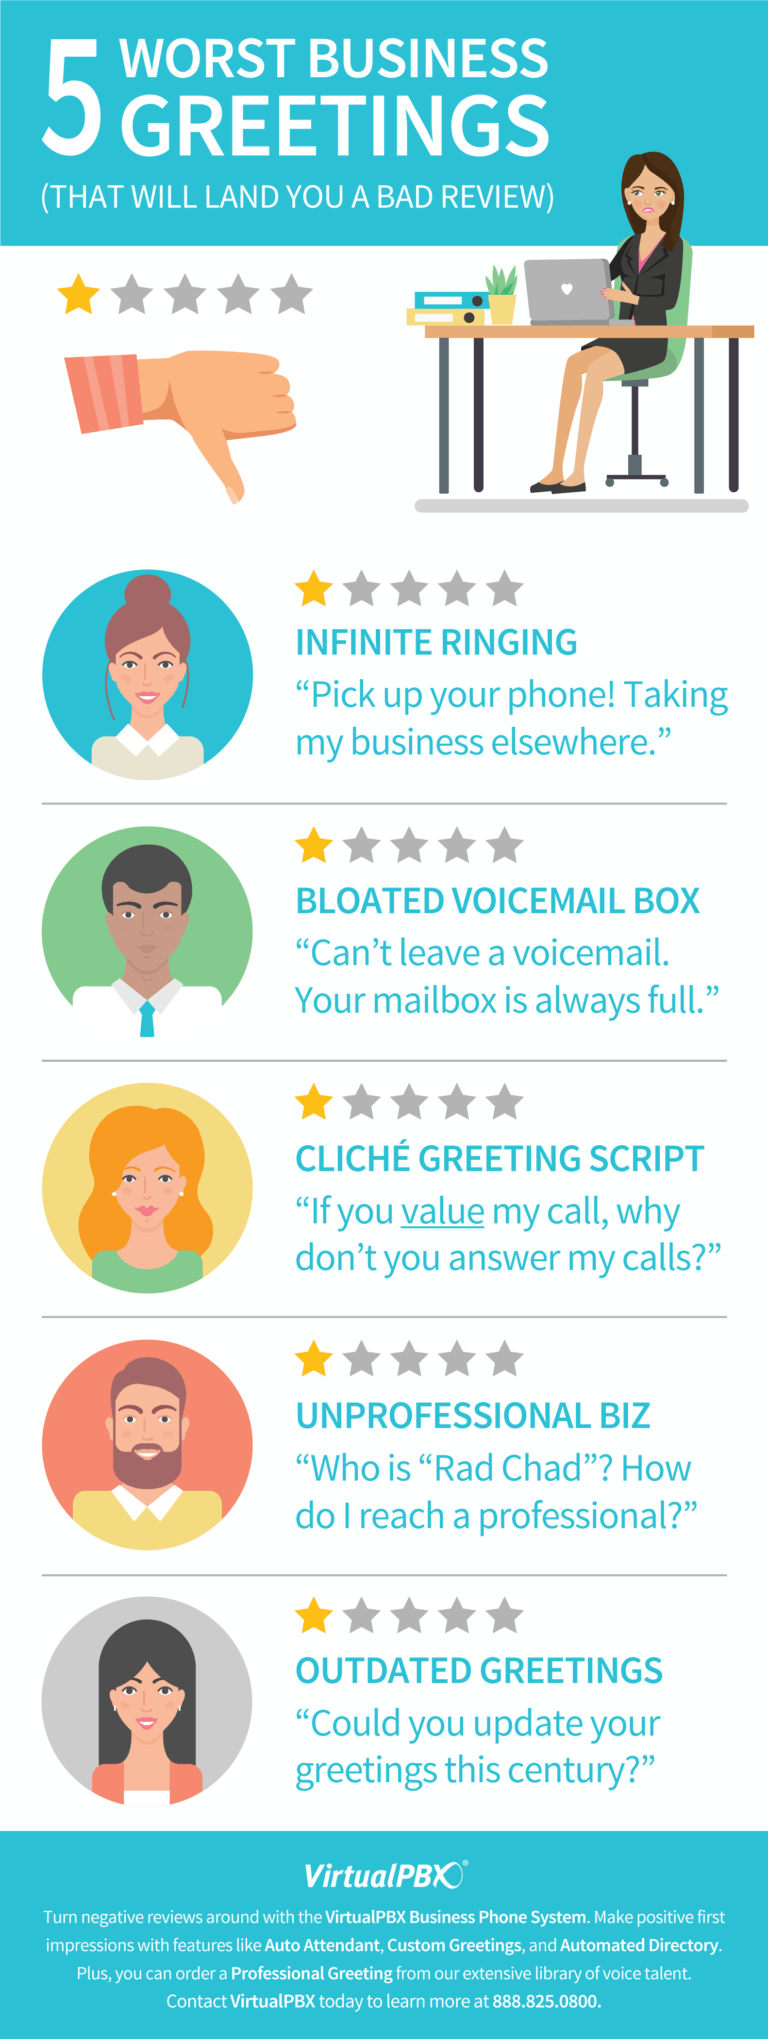 Business Greetings Infographic: The 5 Worst Greetings of 2018